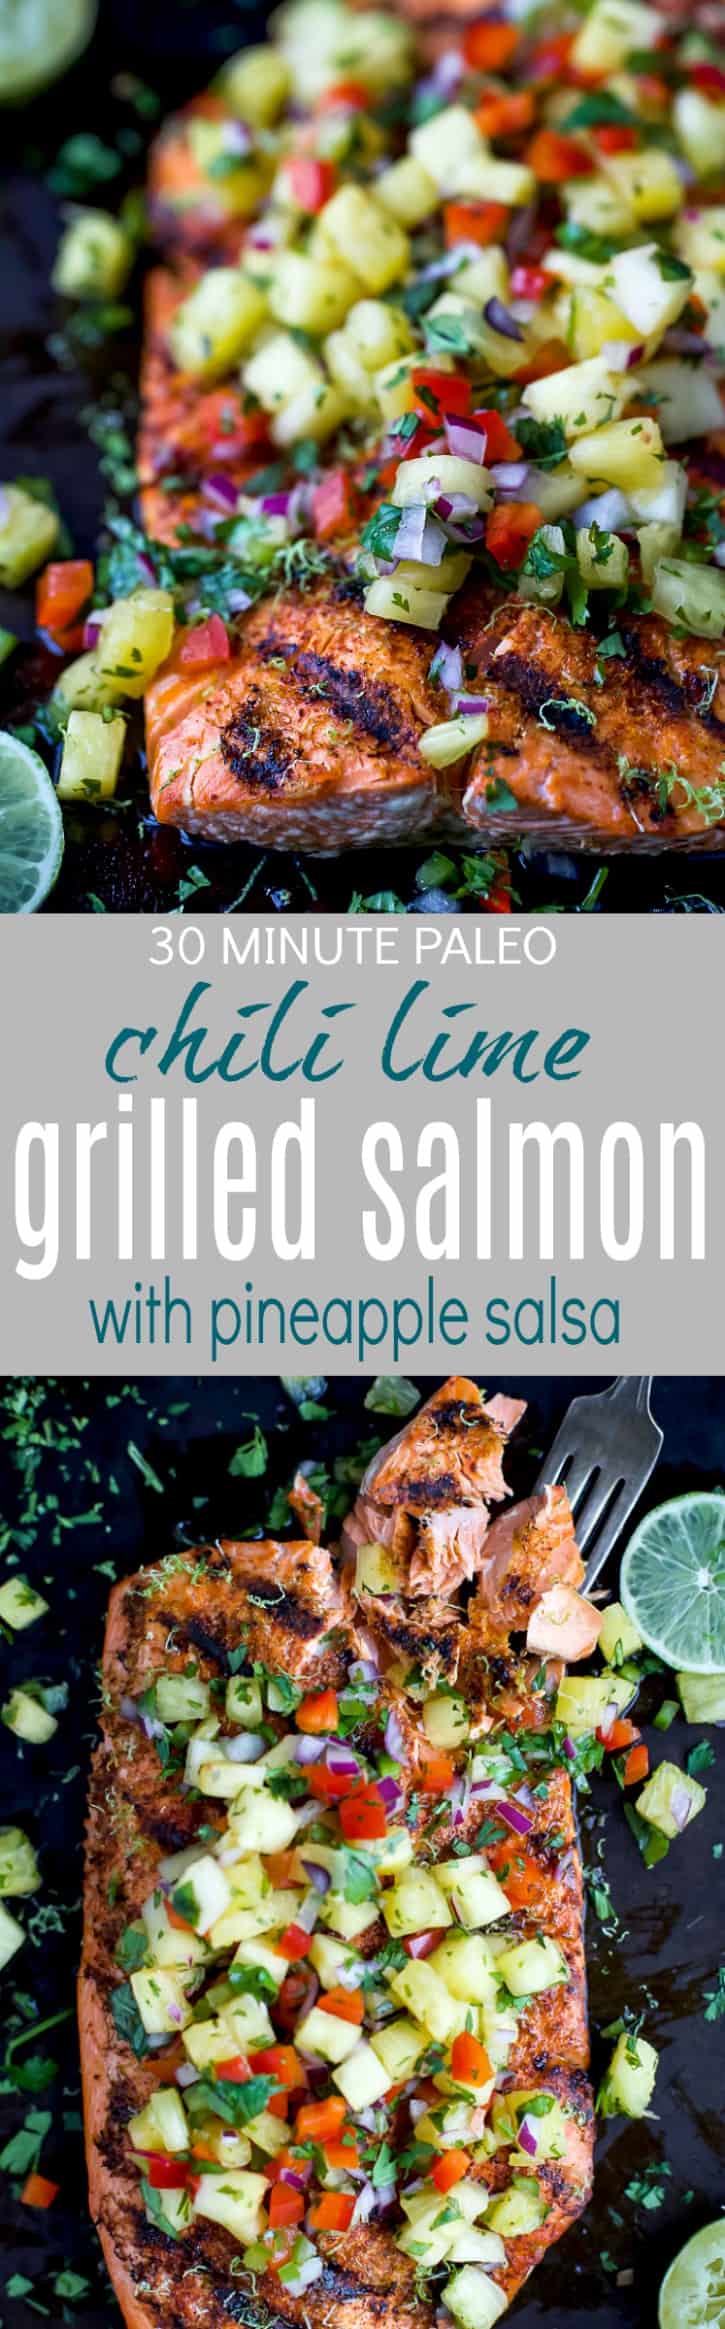 Pinterest collage for 30 minute Paleo Chili Lime Grilled Salmon with Pineapple Salsa recipe